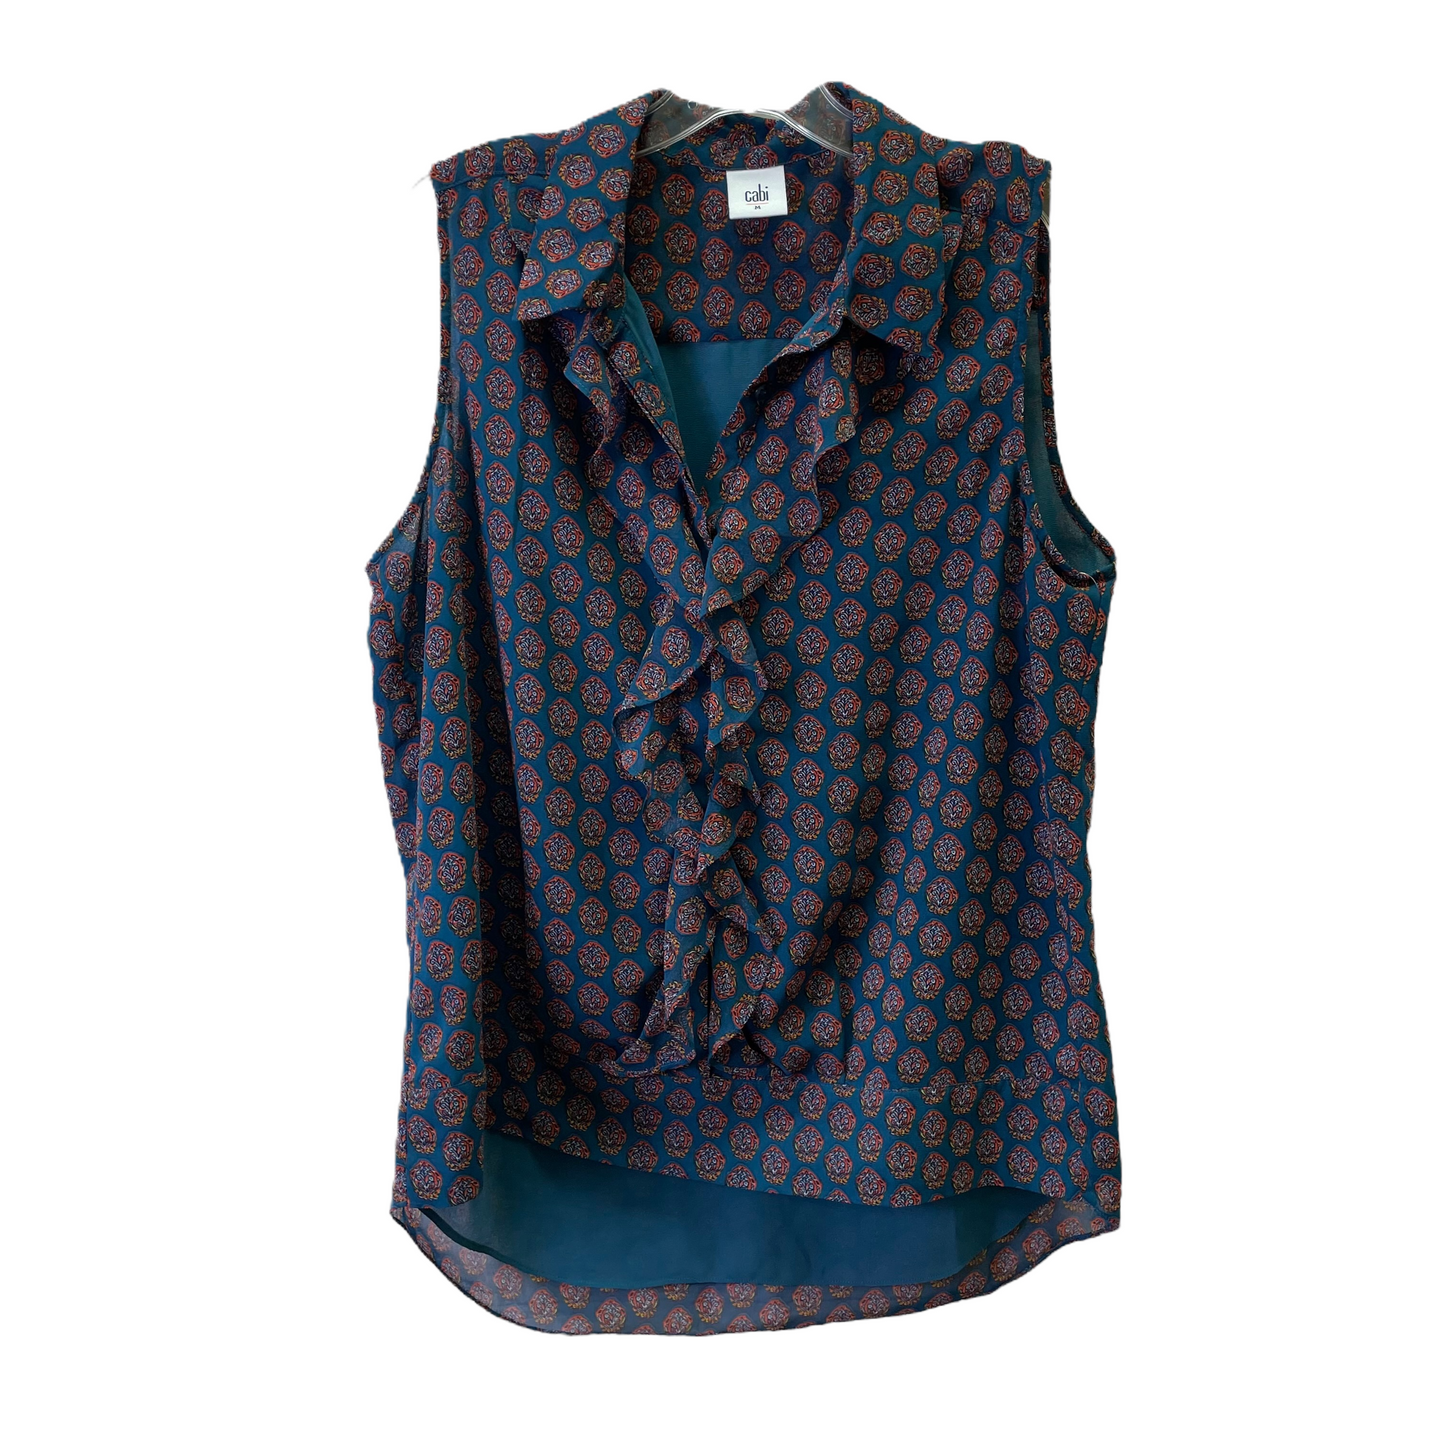 Teal Top Sleeveless By Cabi, Size: M